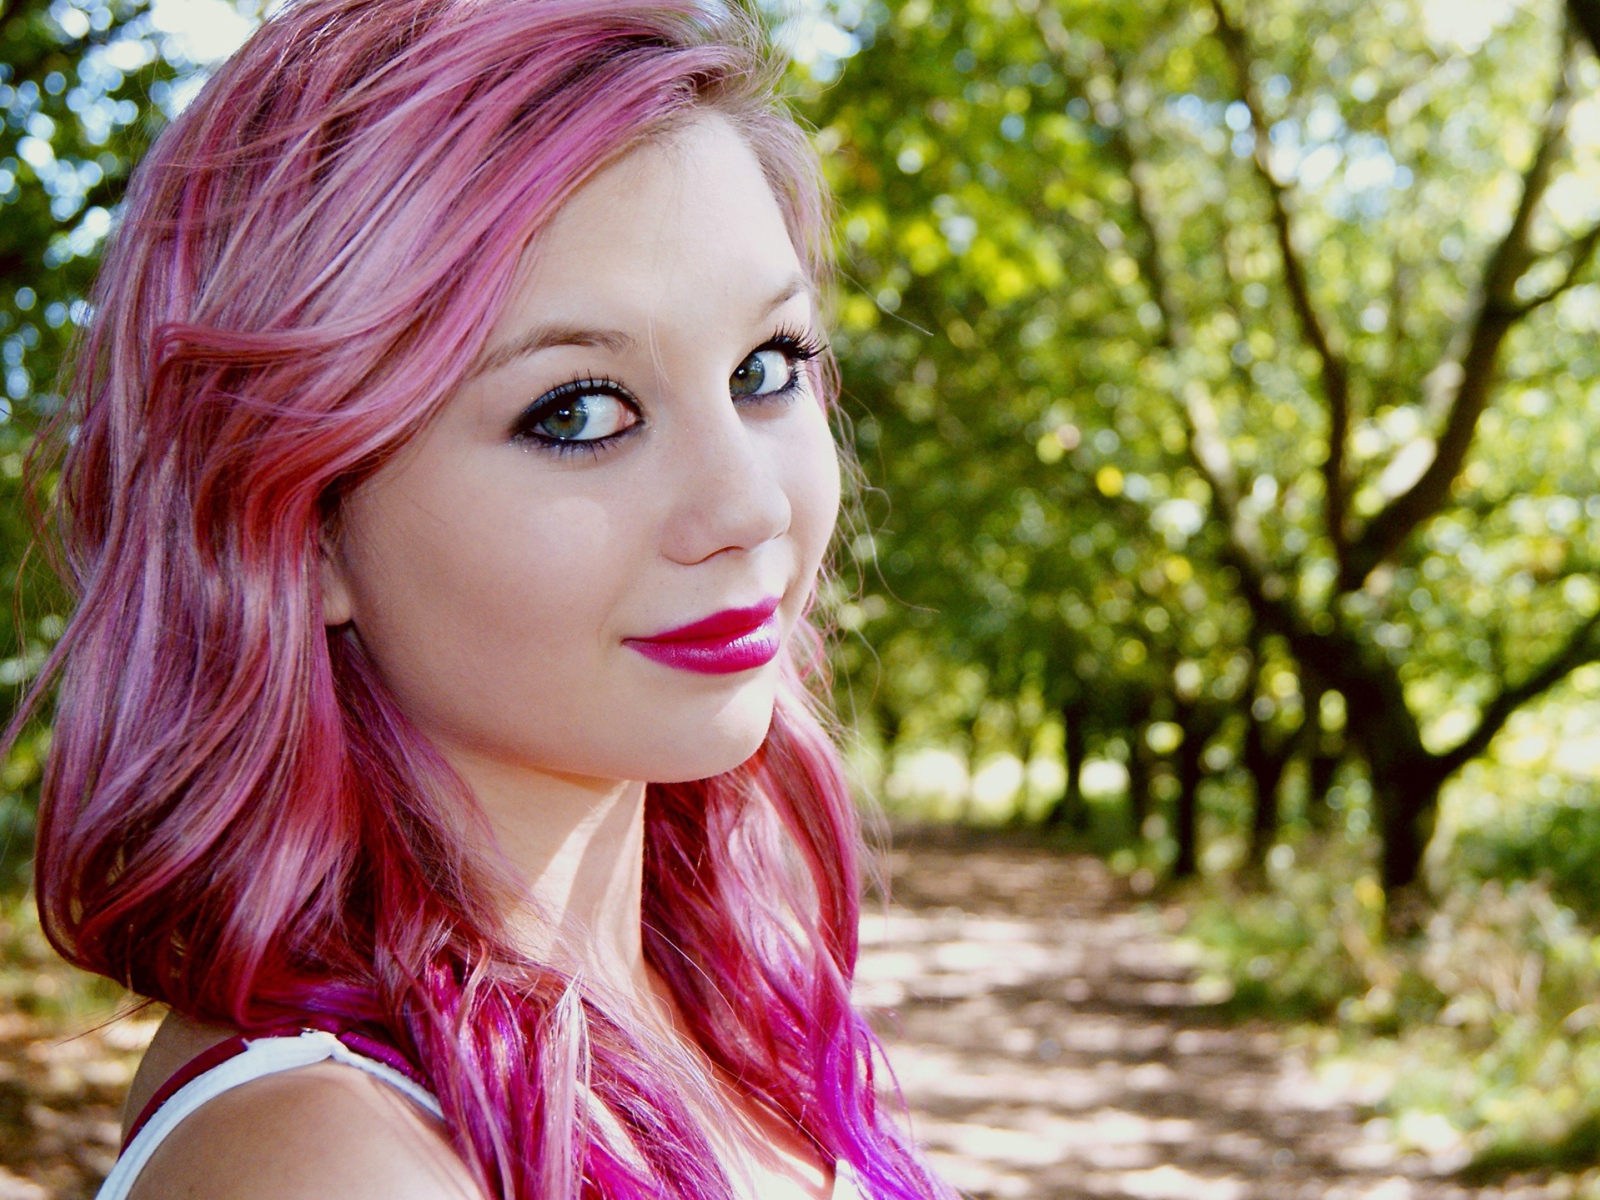 Pretty in Pink faces nature pink hair women wallpaper